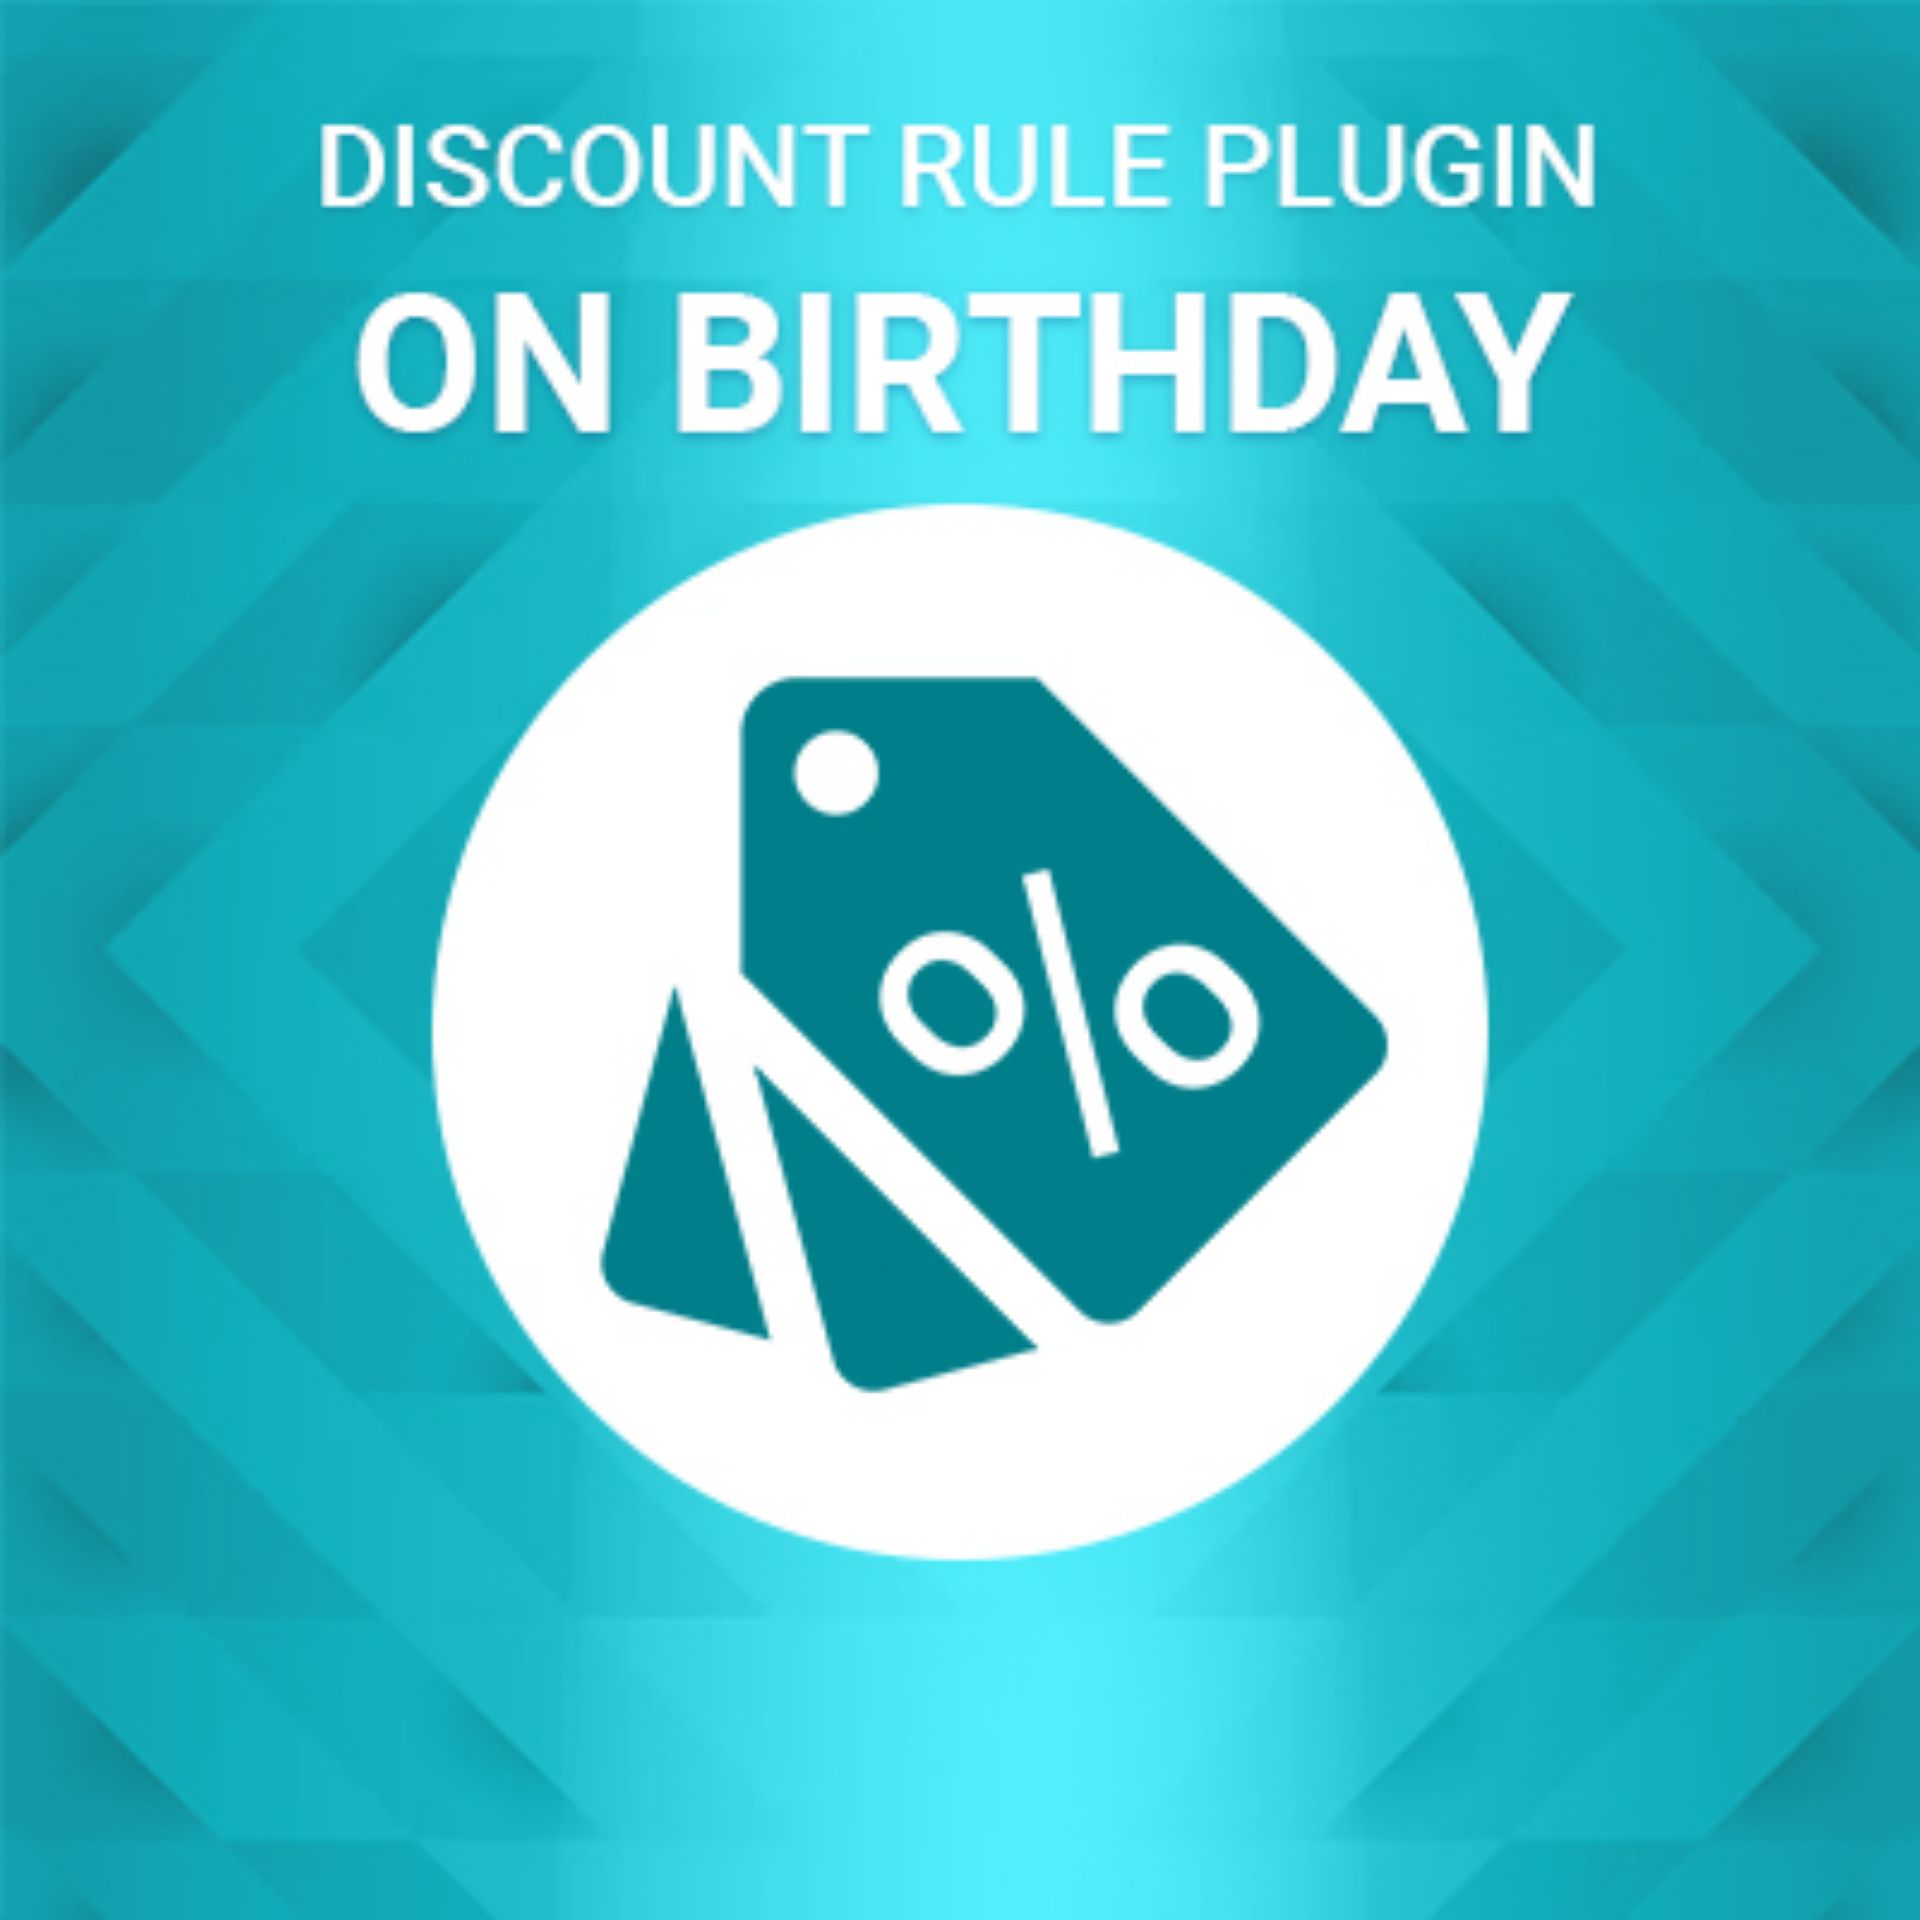 nopCommerce discount rule plugin for customers birthday